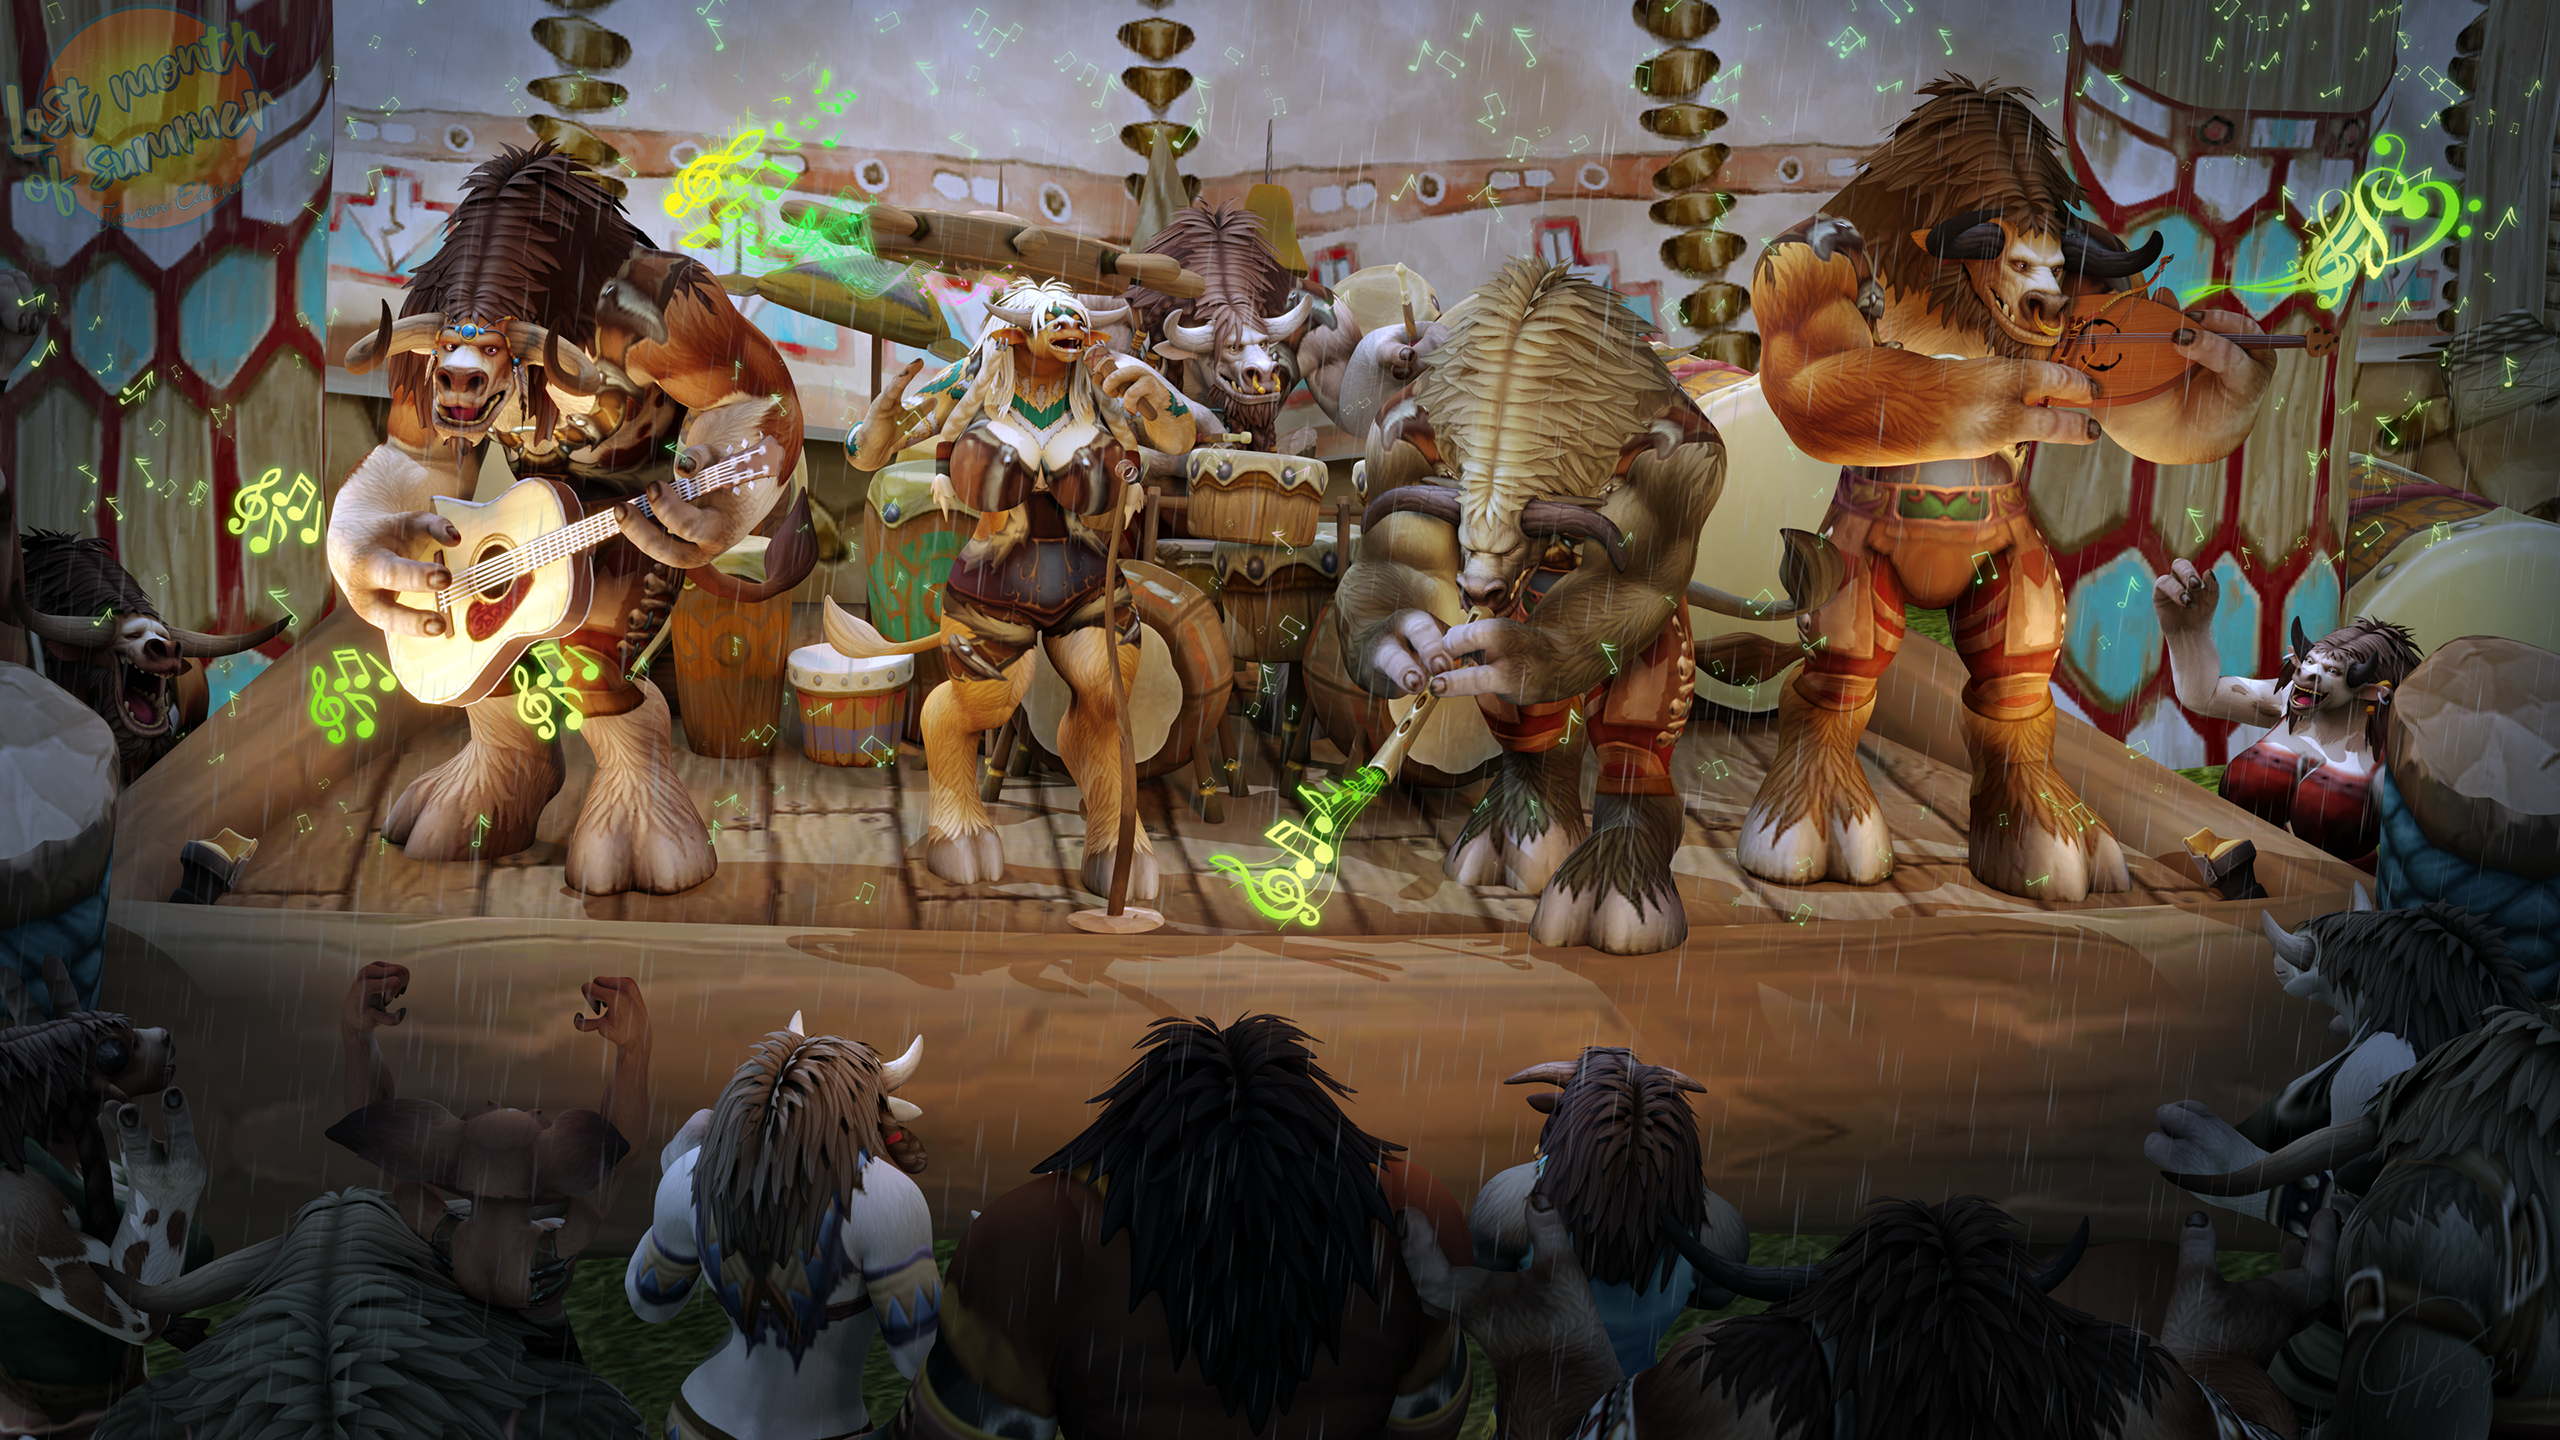 End of the Season Festival [Tauren/SFW]
Last Month of Summer 2021 #4
August can get quite chilly, as summer slowly
turns into autumn. Yet that doesn't stop the
Taurens to have a jolly blowout with music and
performances. It might be raining, yet the band
keeps the spirit high and festive going.
[b][url=http://bakaras.com/murlocish/albums/userpics/10001/18/SummerJamTauren04XL.png]==XL-Size Edit==[/url][/b]
Keywords: Tauren;SFW